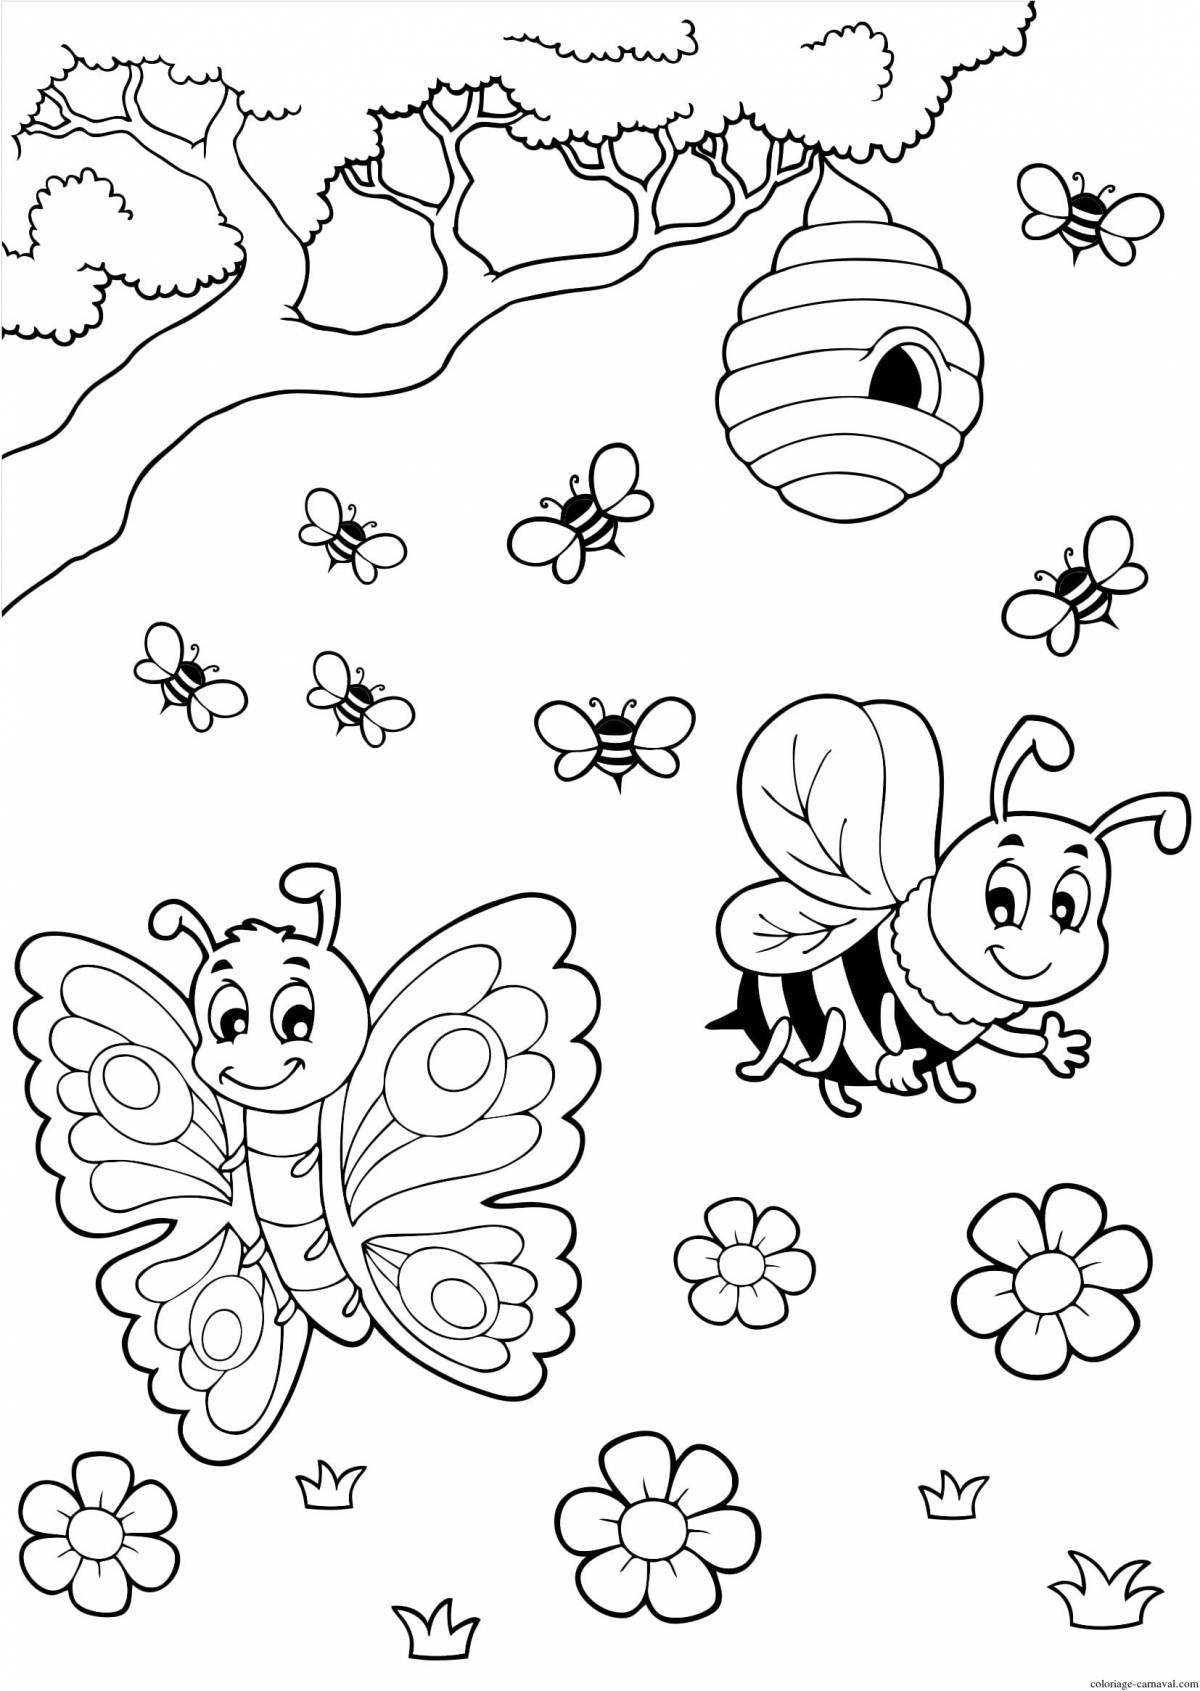 Cute insect coloring book for 6-7 year olds